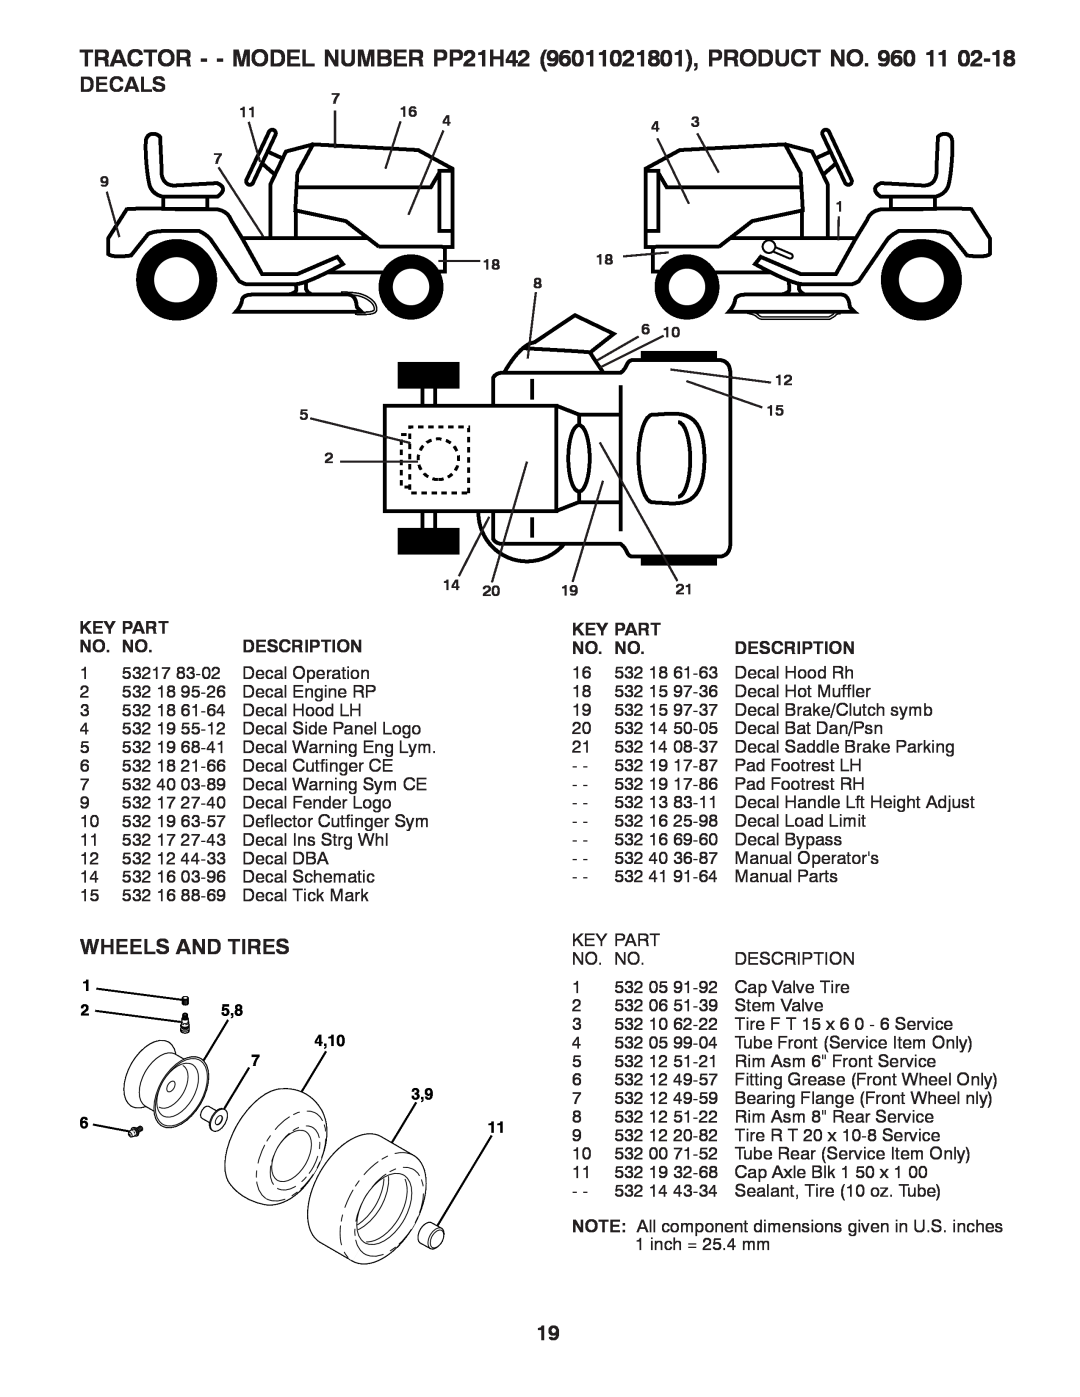 Poulan 532 41 91-64 manual Decals, Wheels And Tires, TRACTOR - - MODEL NUMBER PP21H42 96011021801, PRODUCT NO, 1818, 4,10 